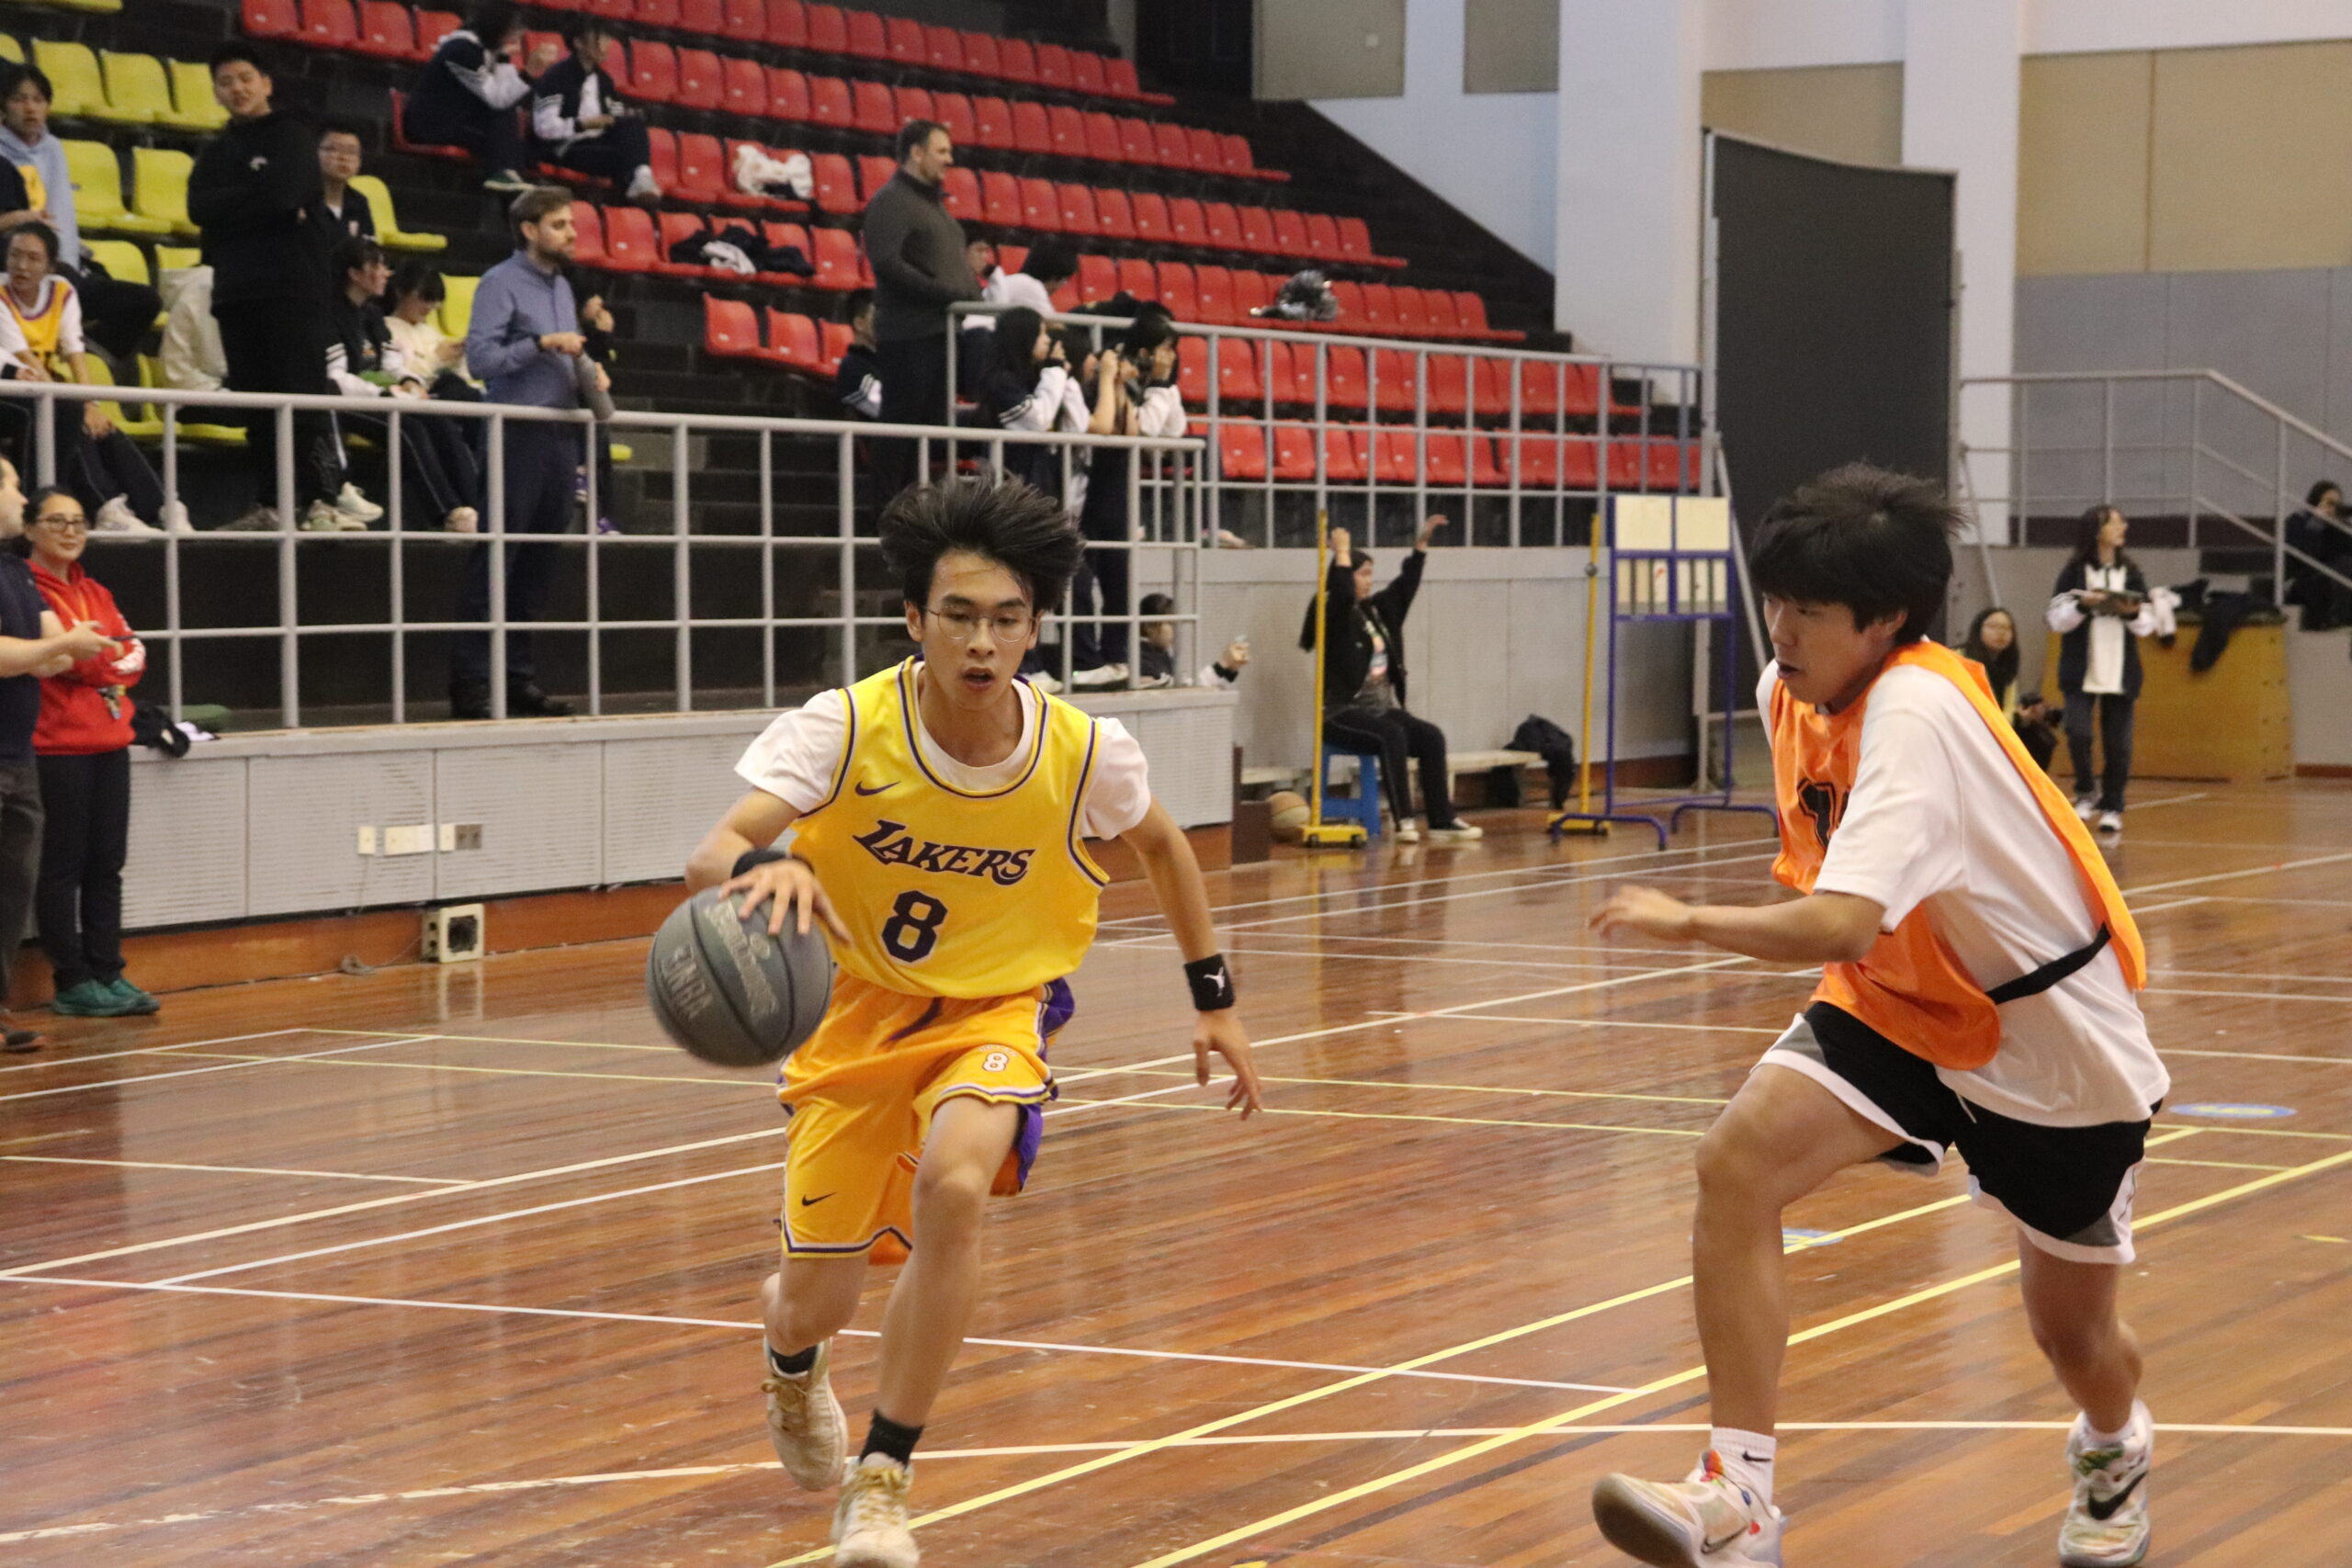 Basketball competition — enjoy the happiness of doing sports